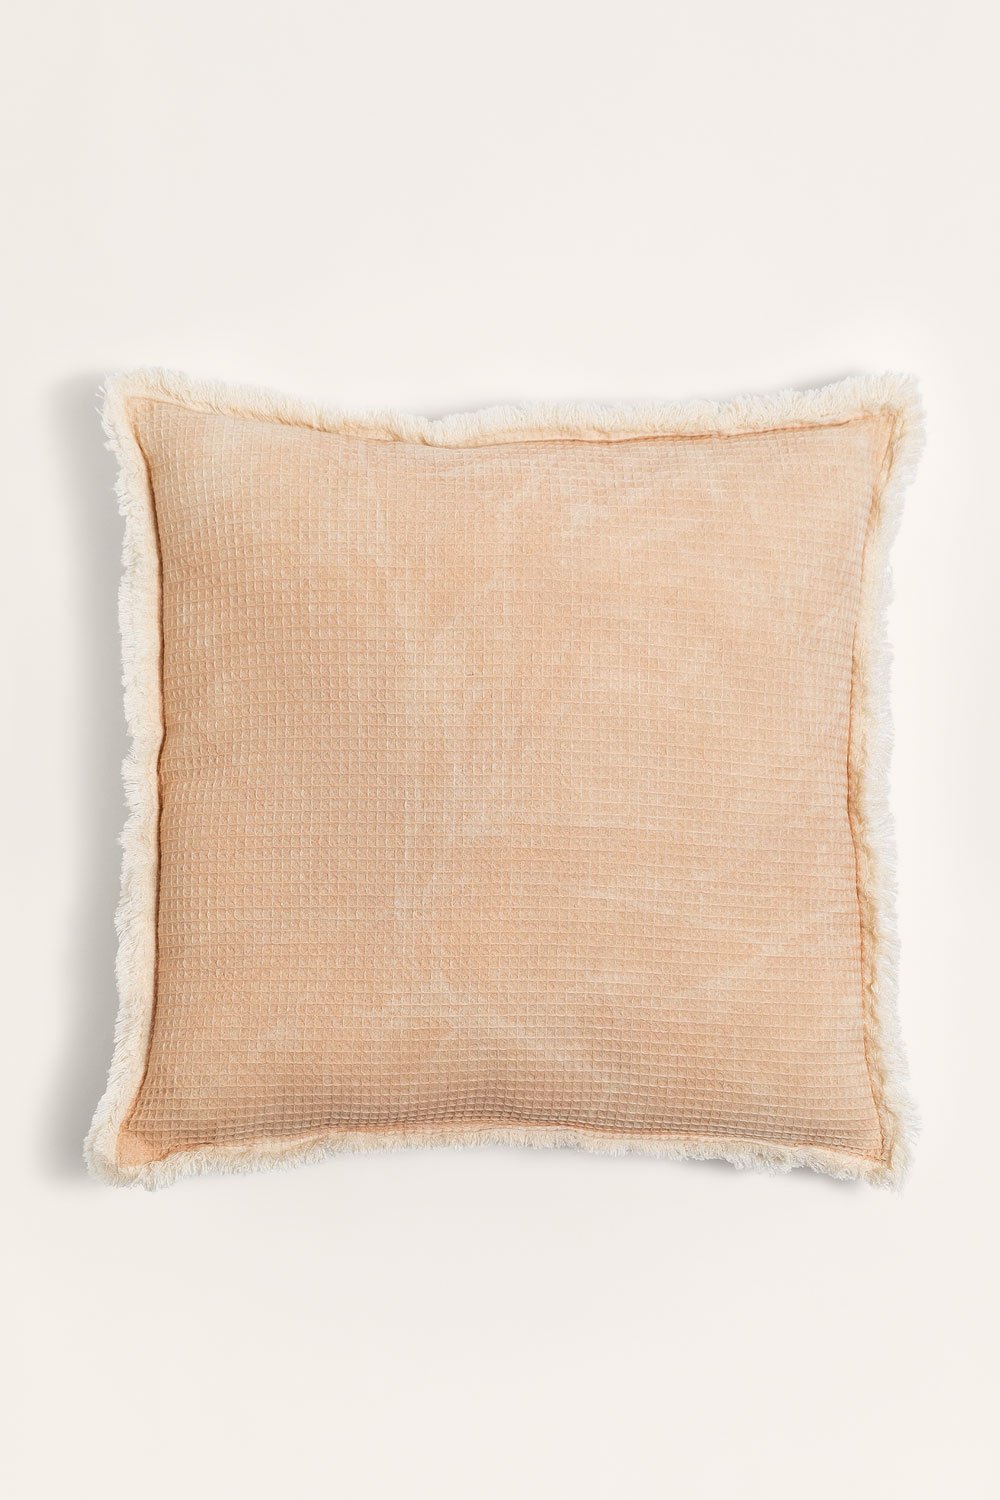 Square Cotton Cushion (45x45 cm) Cliff, gallery image 1